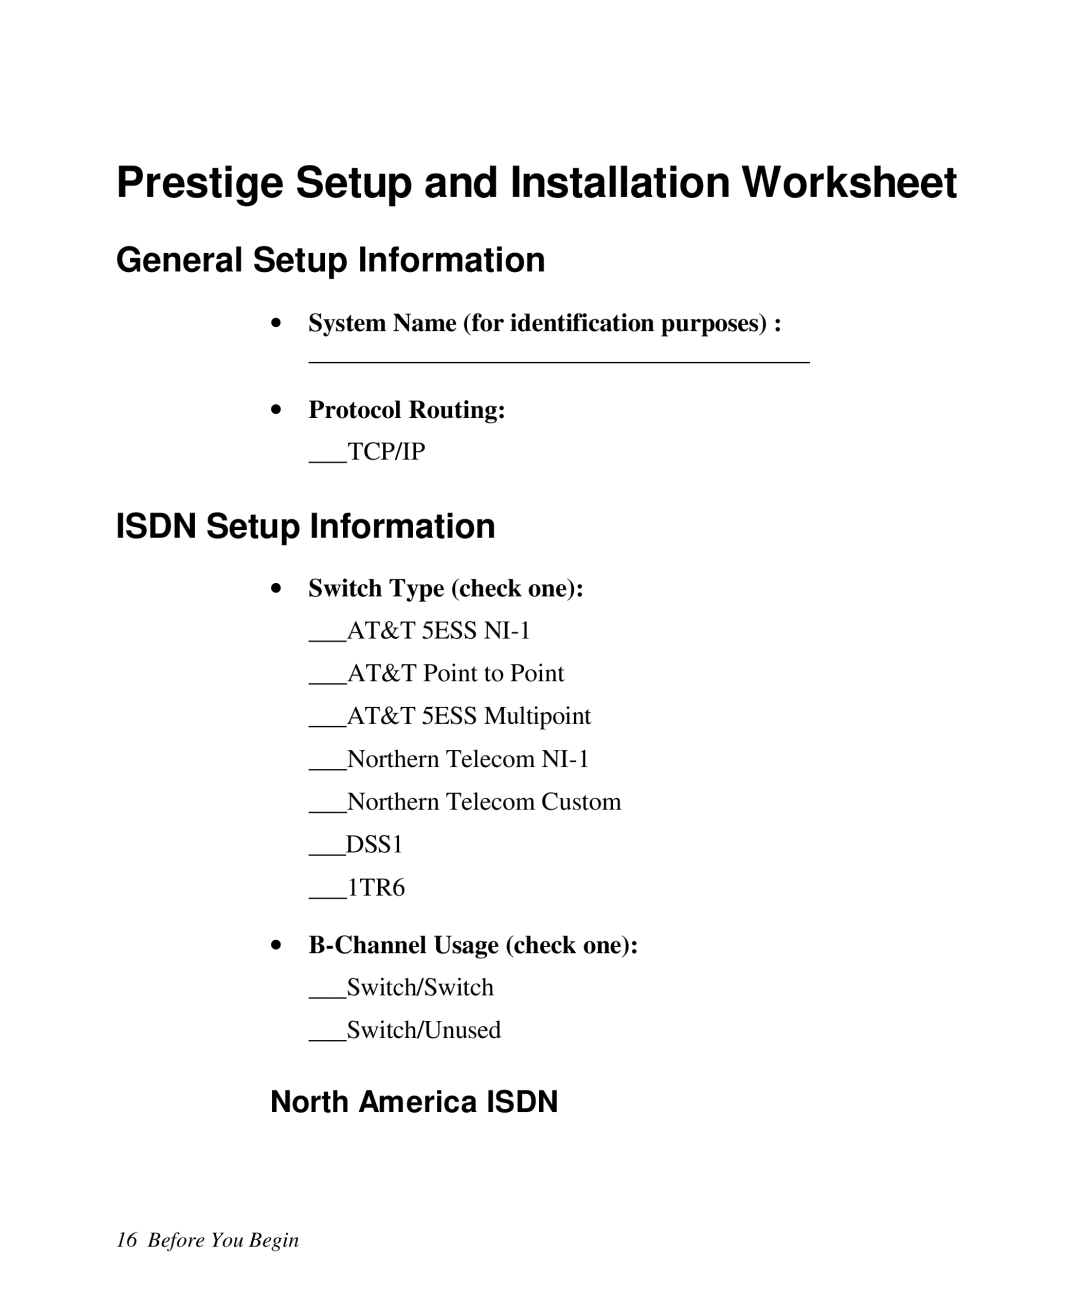 ZyXEL Communications Prestige100 General Setup Information, ISDN Setup Information, North America ISDN, ∙ Protocol Routing 